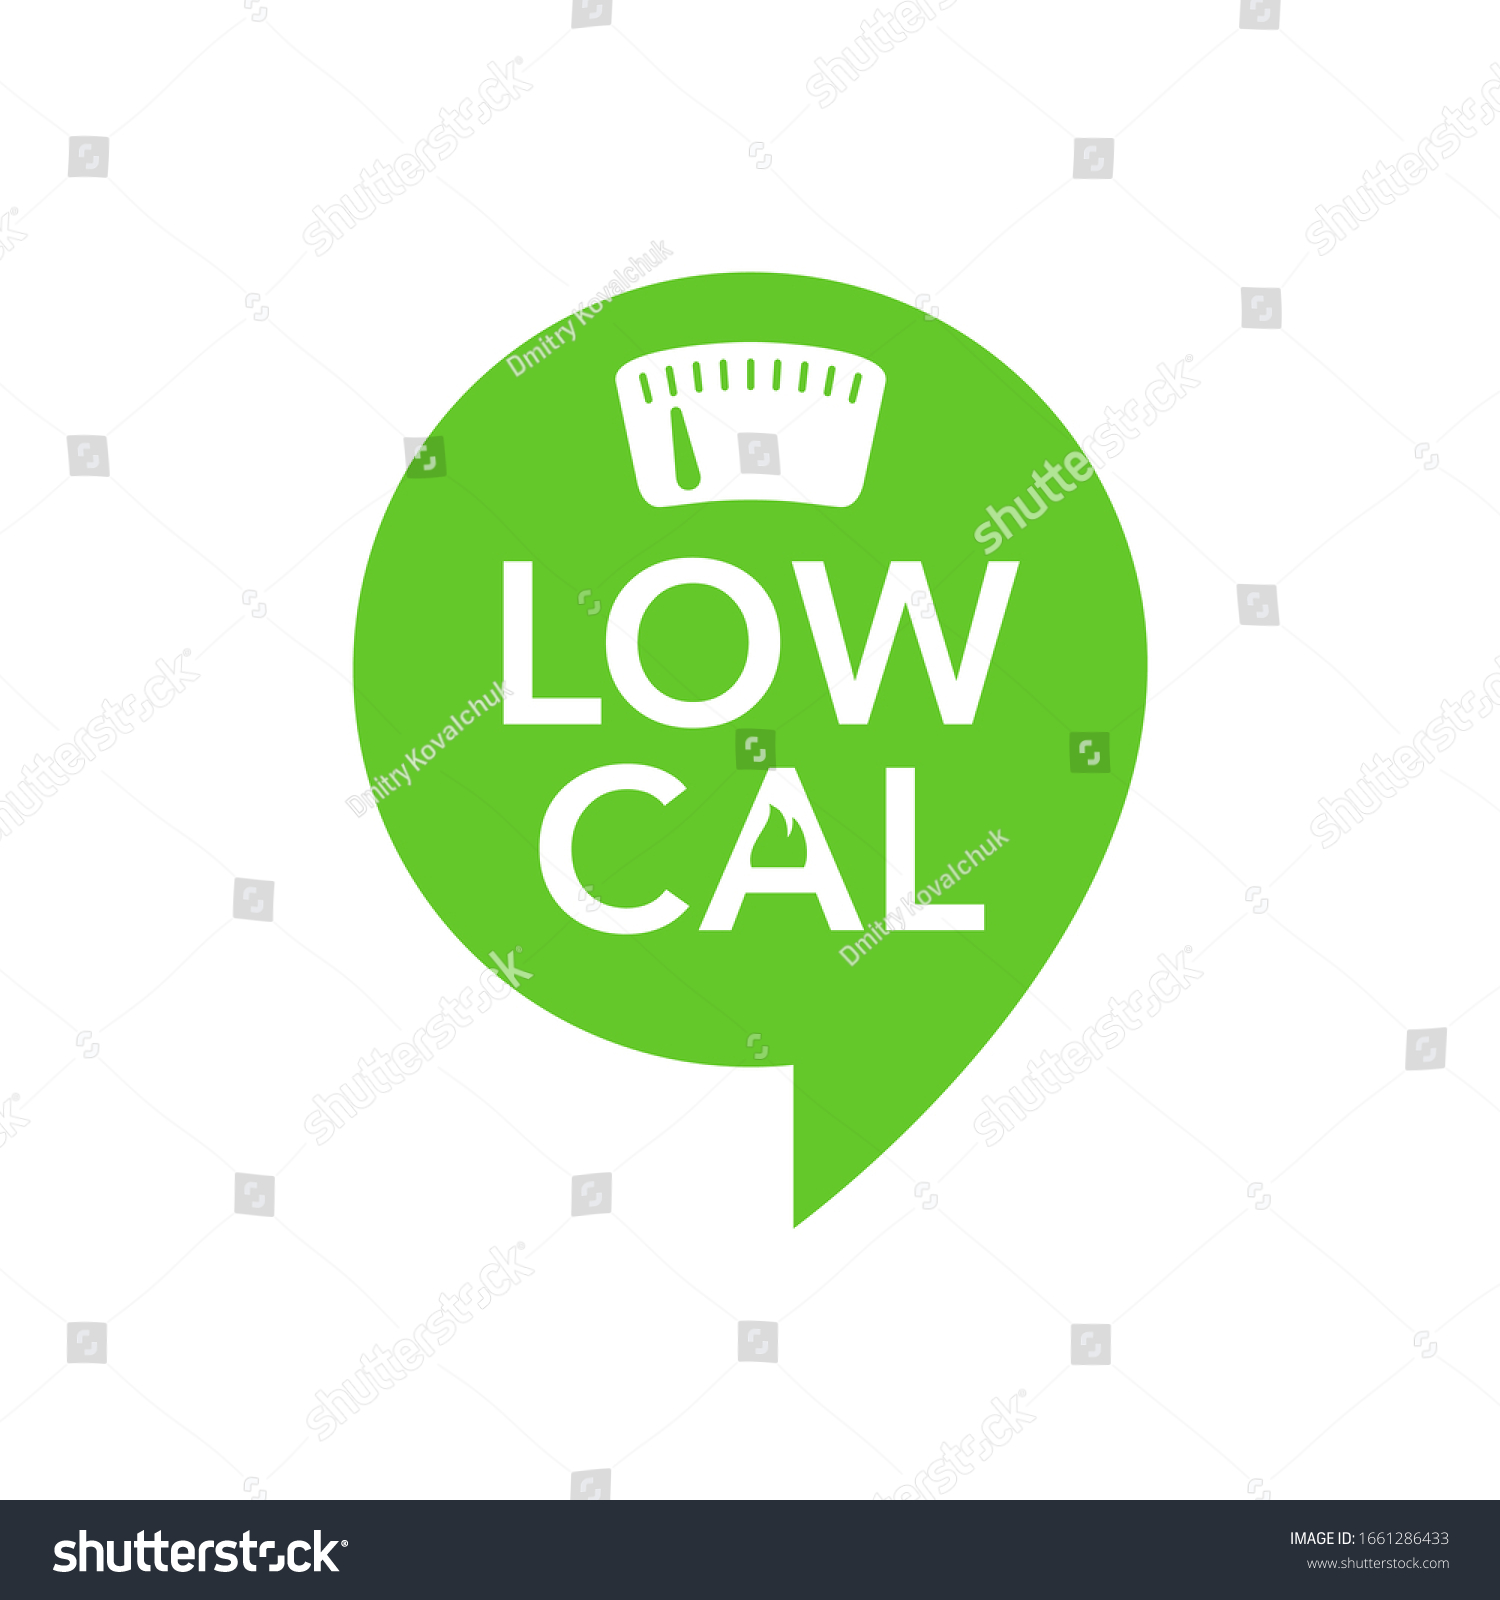 SVG of Low Cal stamp - combination of pin mark and weight scales - pictogram for dietary low-cal food products - isolated vector emblem svg